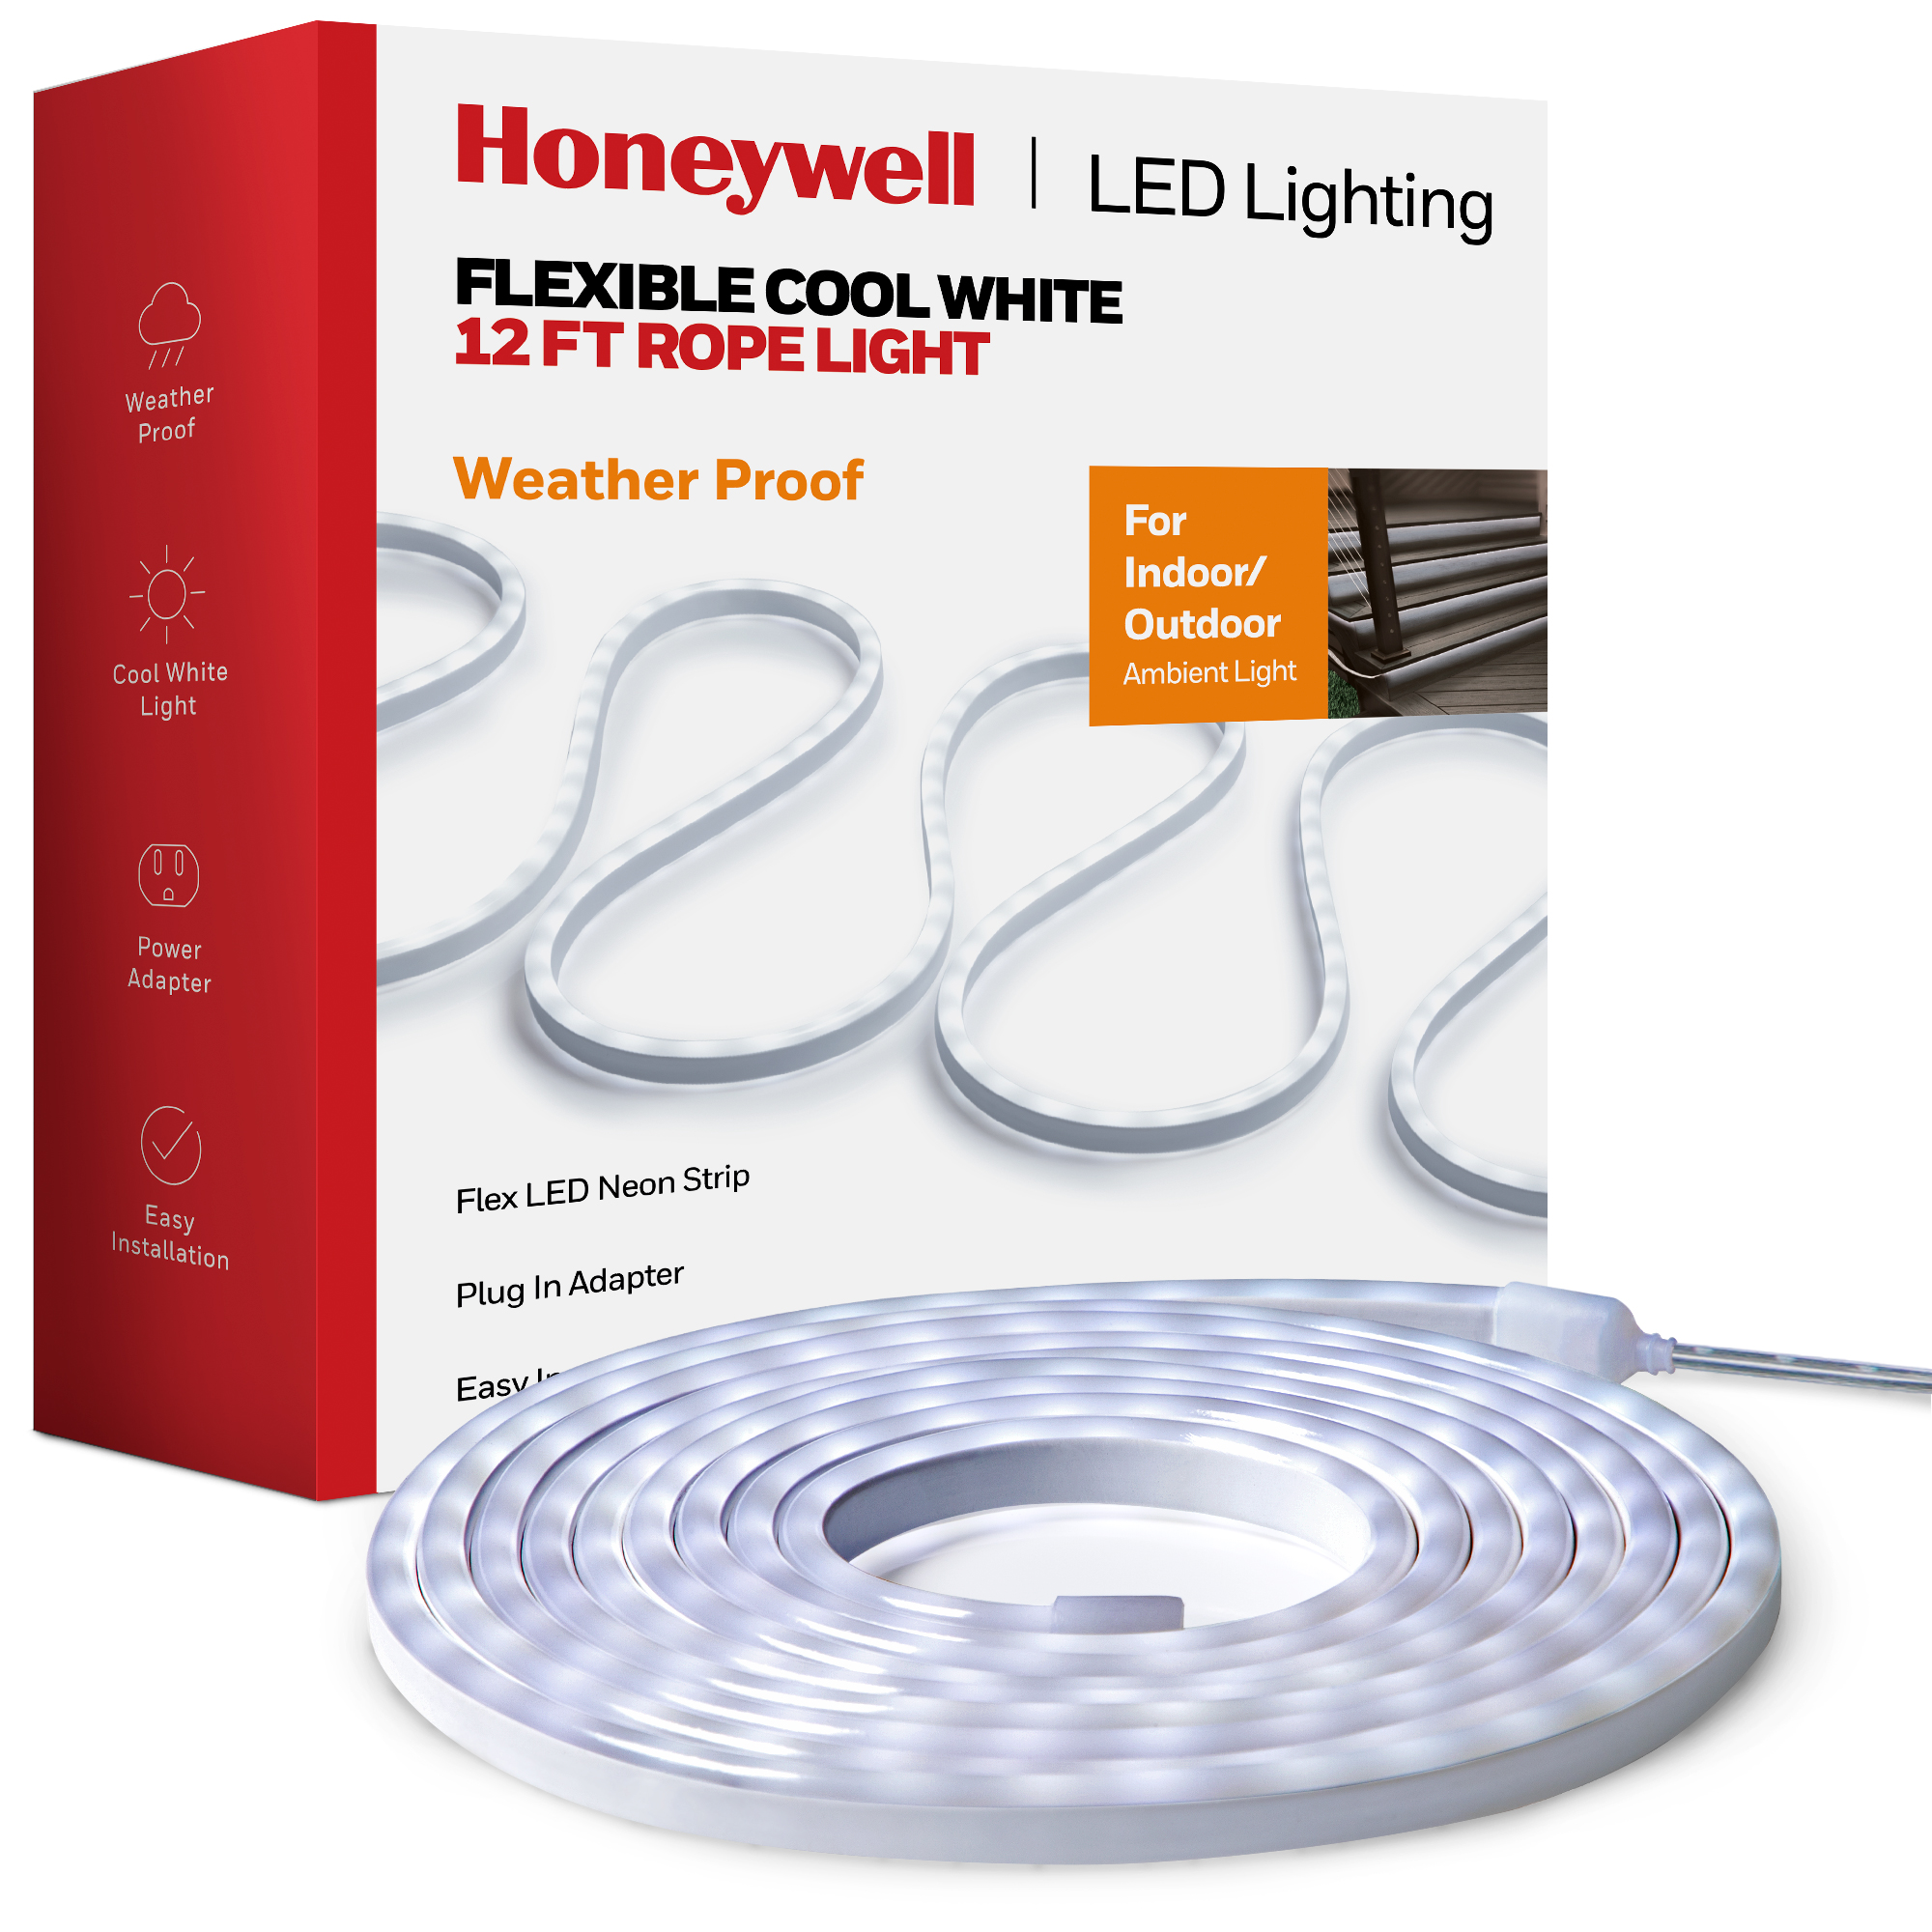 Honeywell Flexible LED White Neon Rope Light, Outdoor/Indoor, Power Adapter - 12ft - image 1 of 7